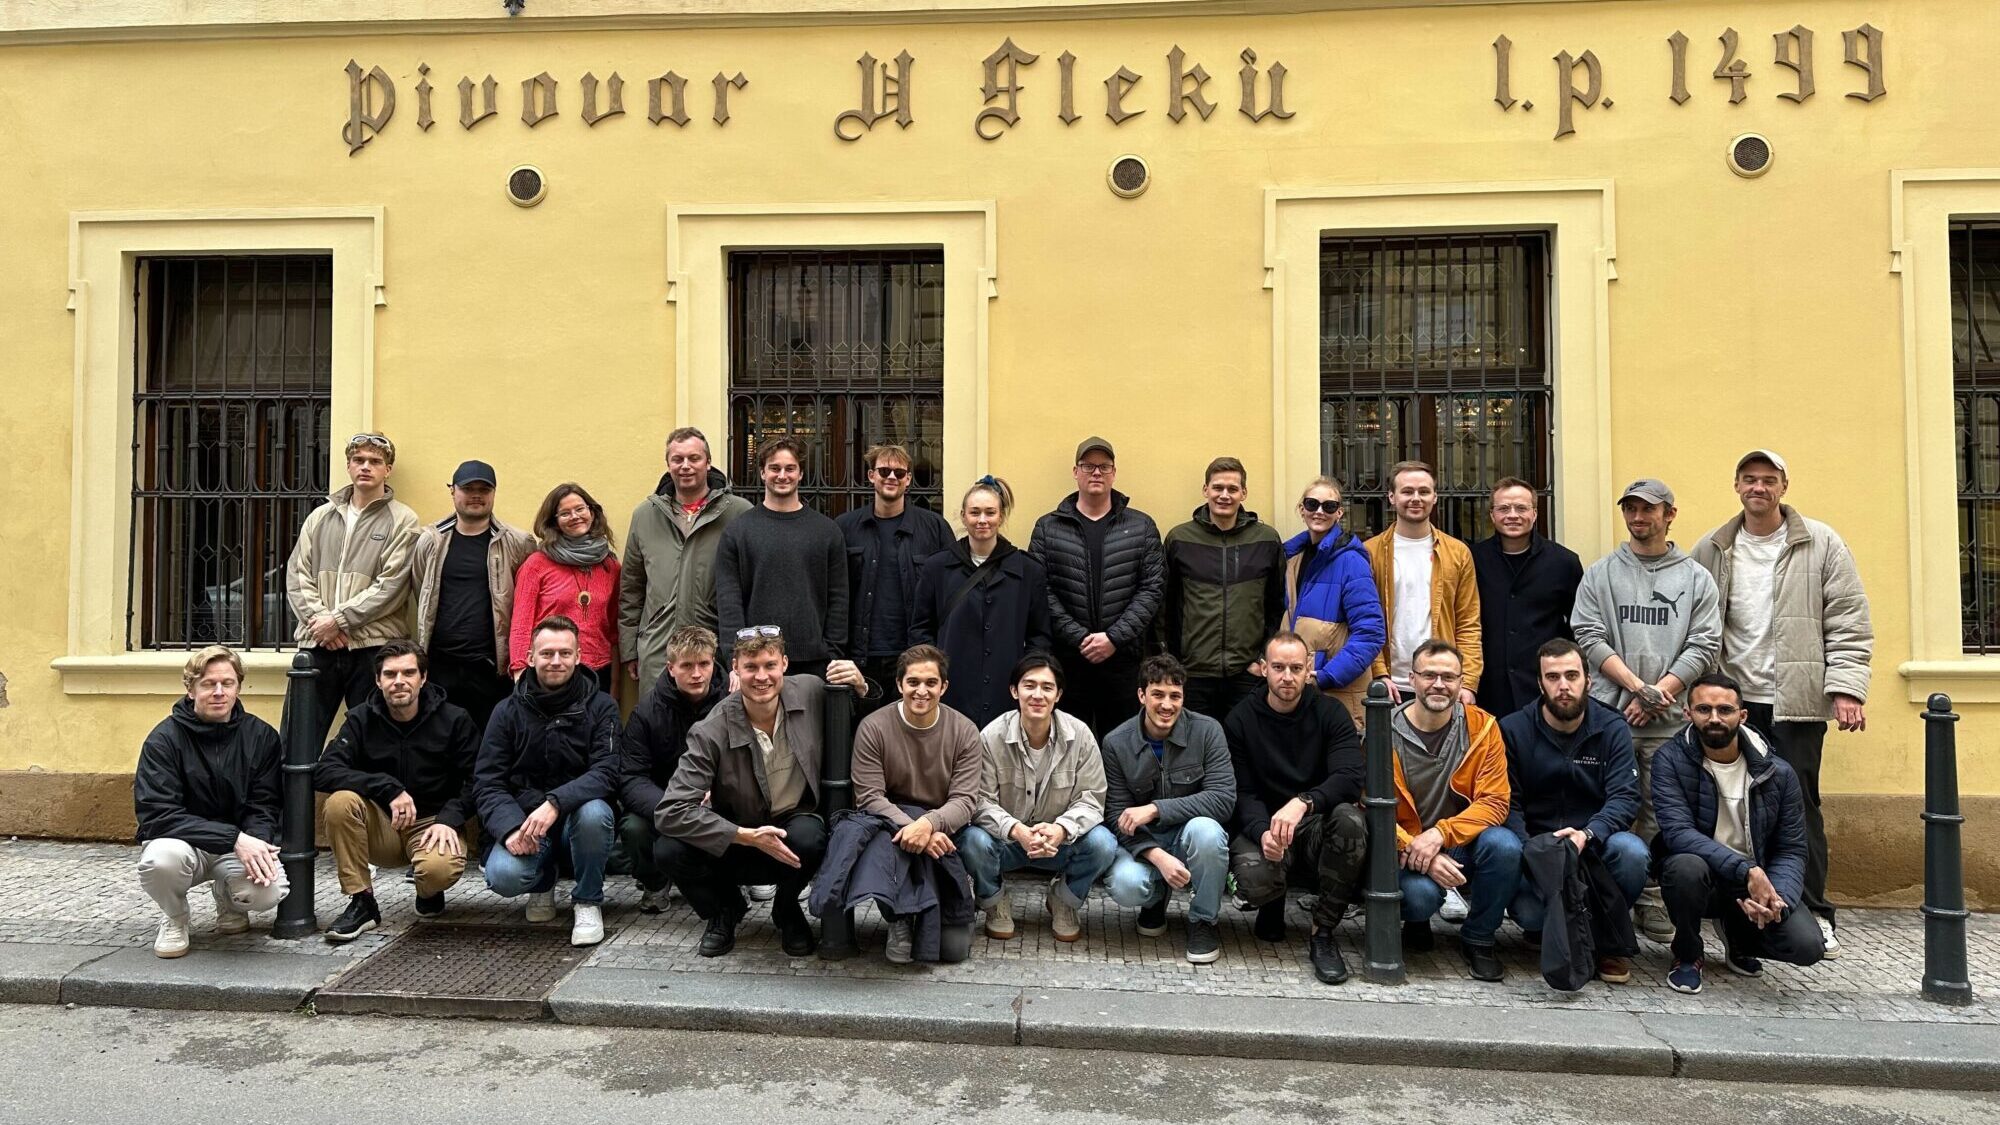 The EasyPractice team in Prague. The group was photographed in front of the historic pub U Fleků.